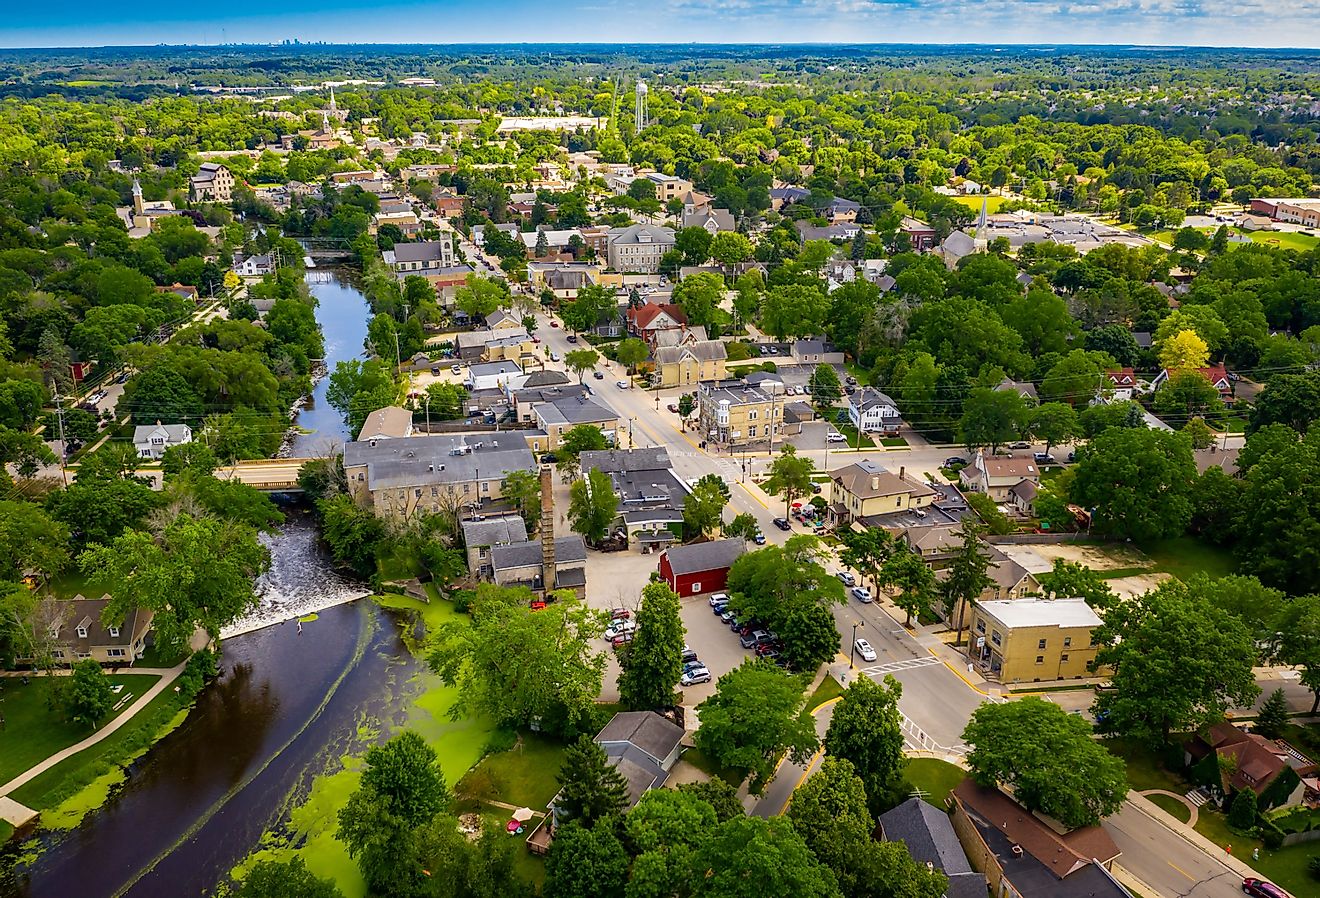 Downtown Cedarburg, Wisconsin is known for its quaint downtown district lined with historic buildings. Image credit James Meyer via Shutterstock